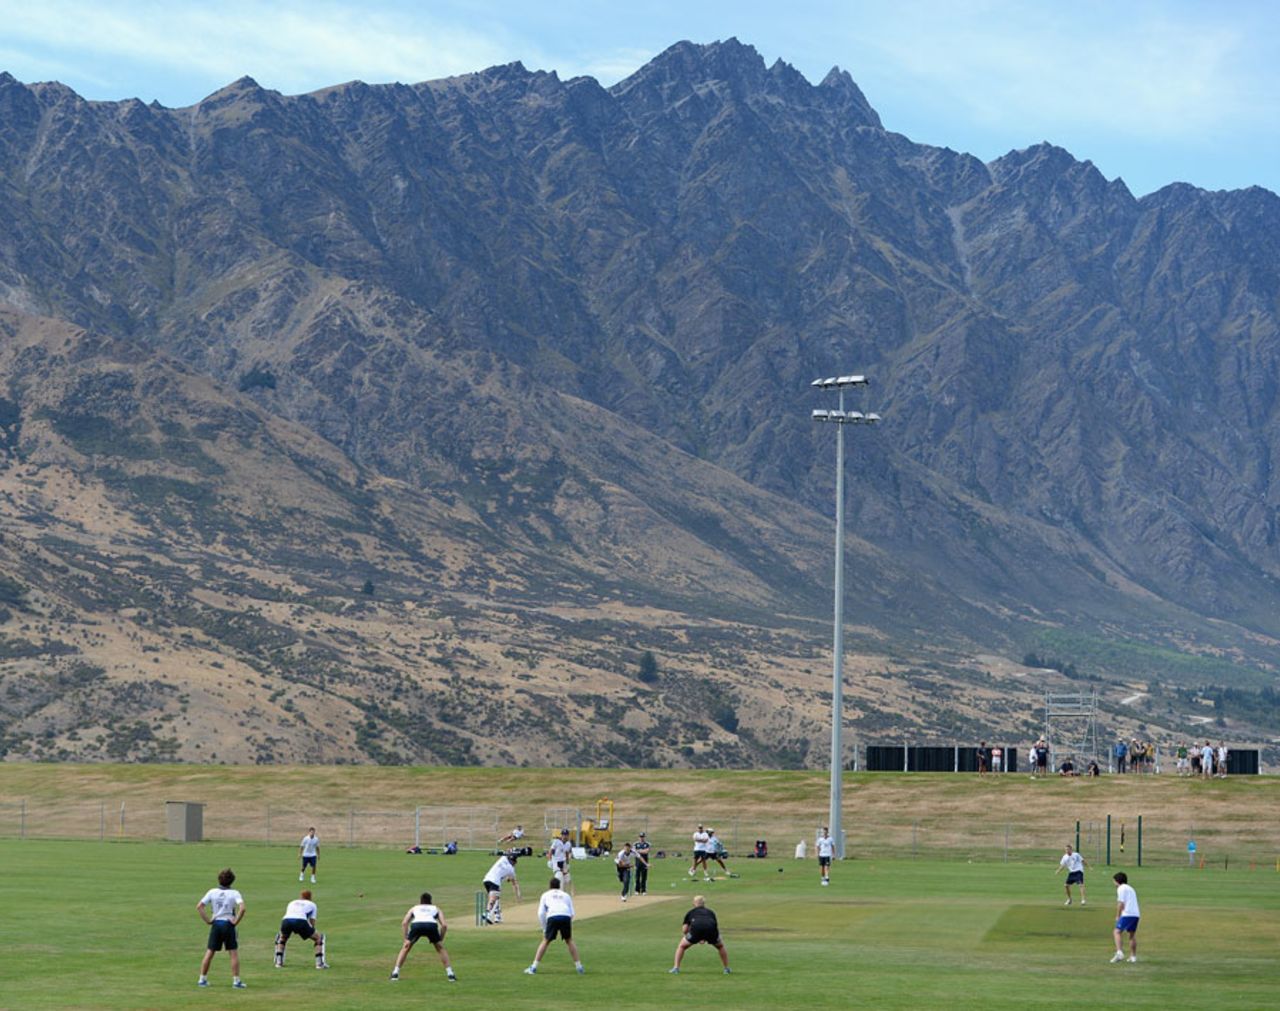 The England team practise against a picturesque setting in Queenstown, New Zealand, New Zealand XI v England XI, Queenstown, New Zealand